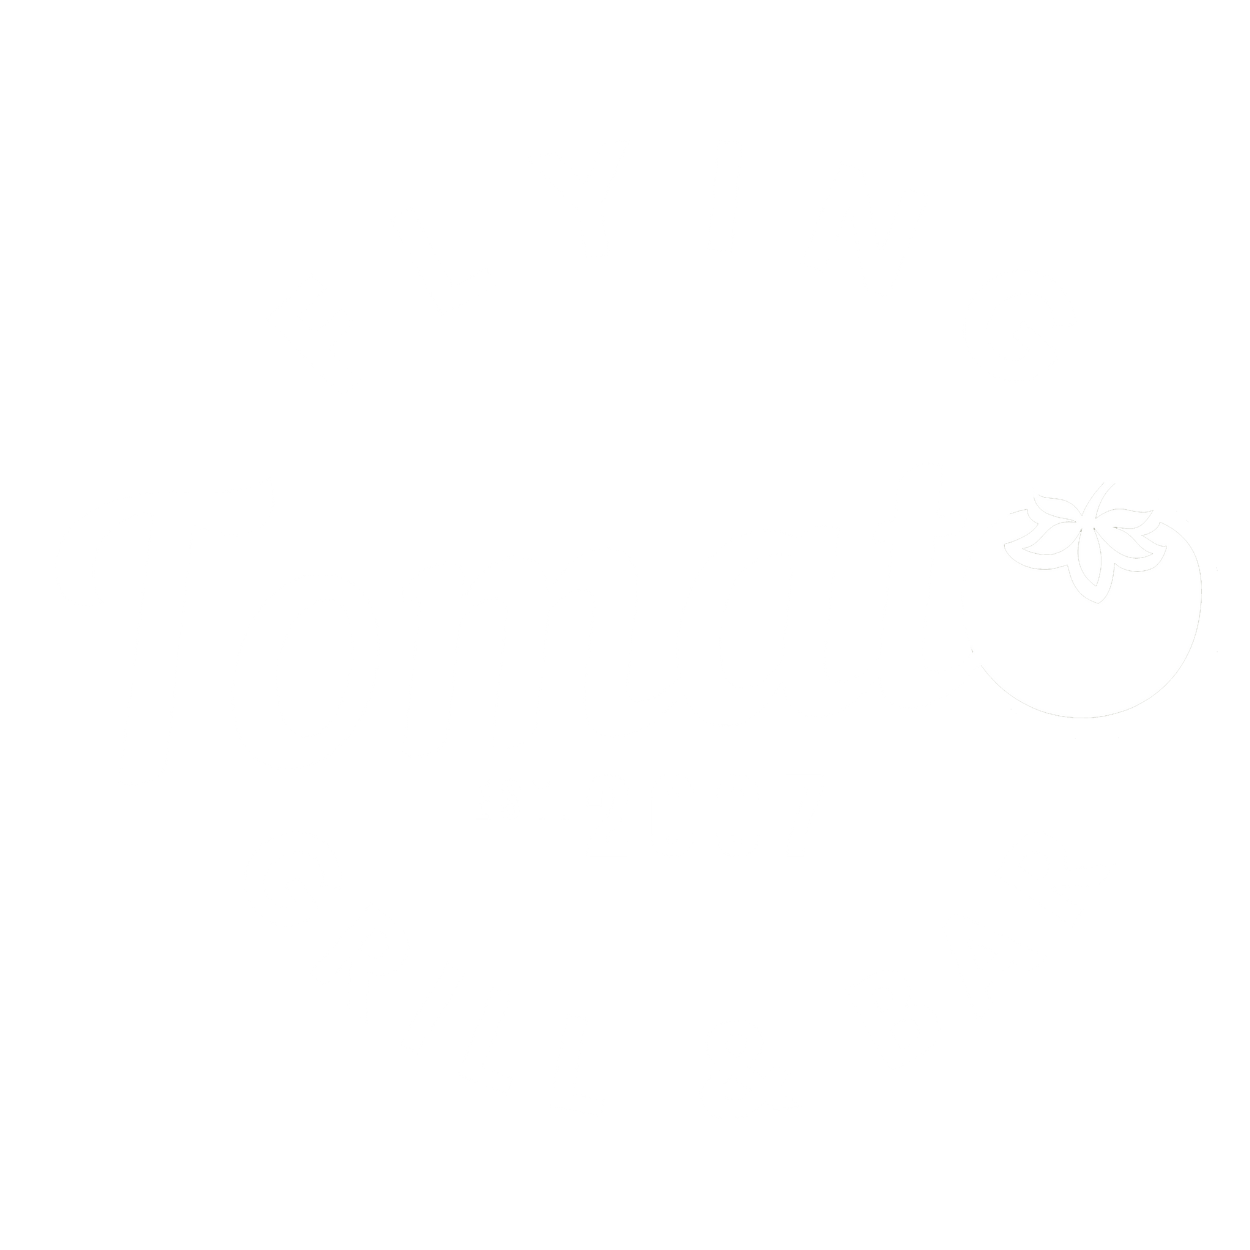 The Flying Tomato Bar and Grill